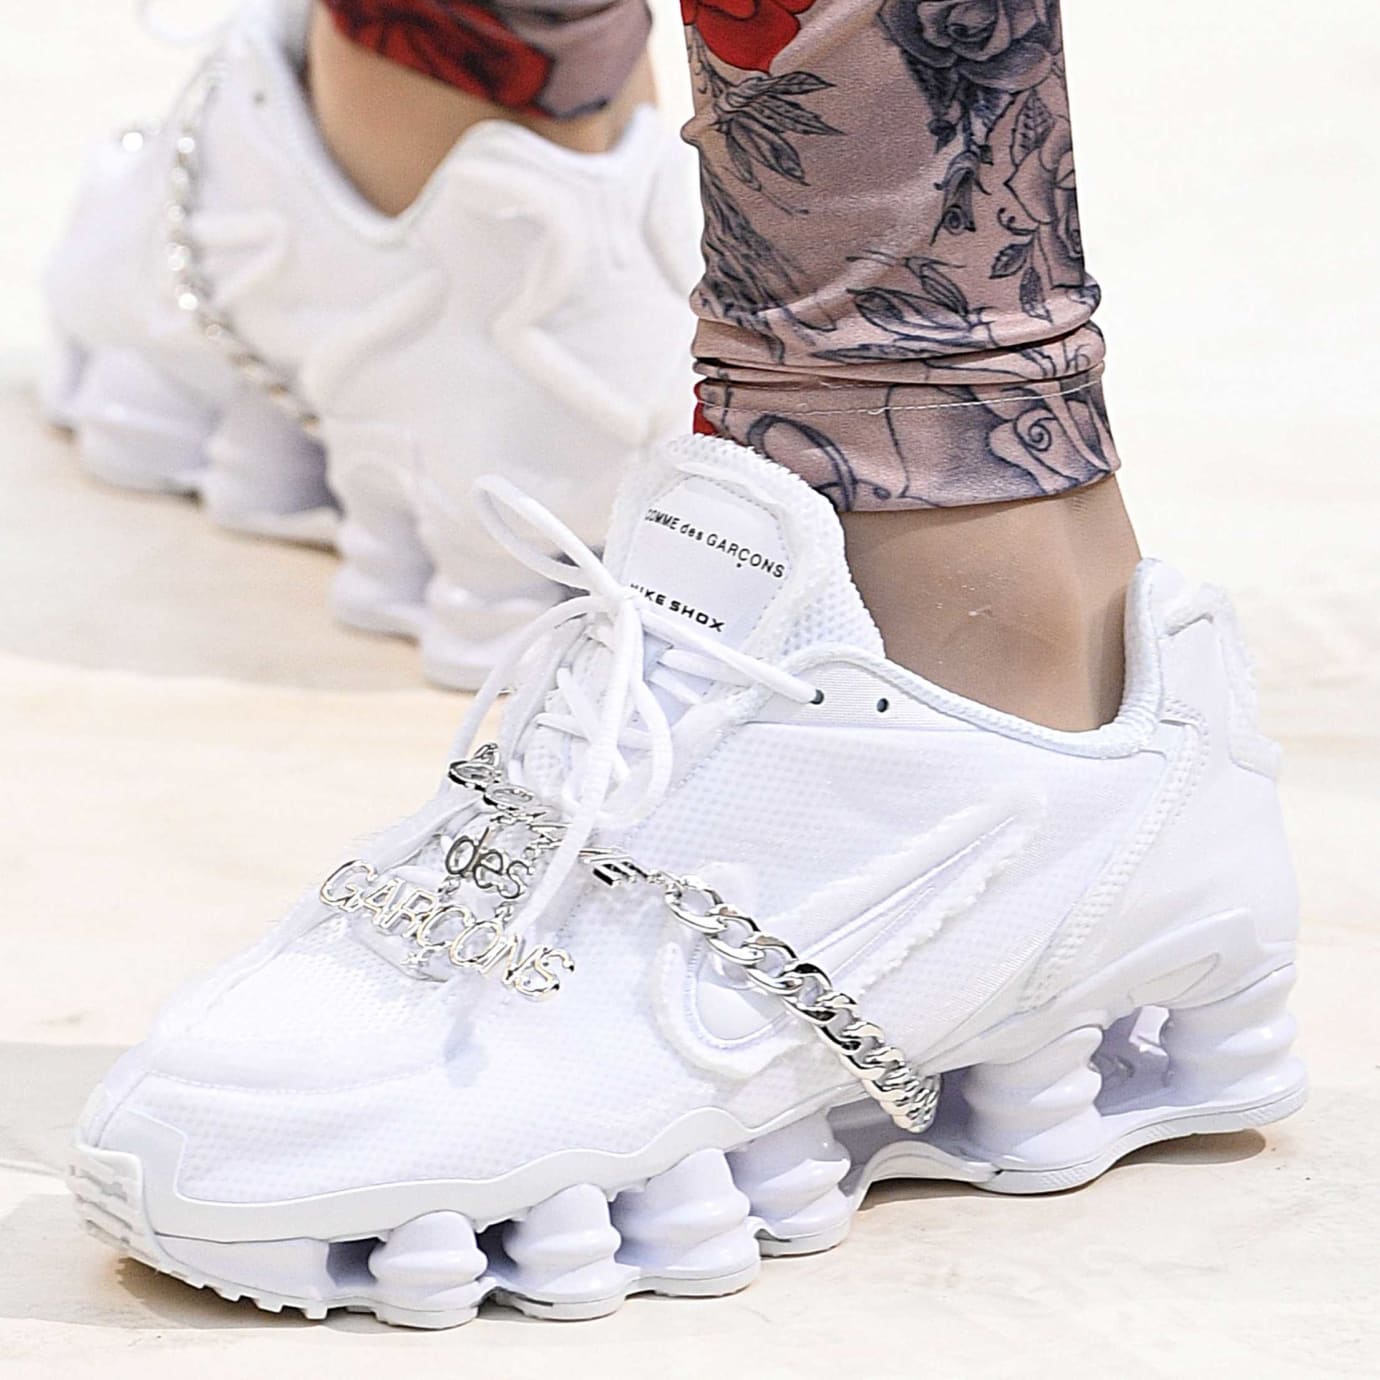 Comme des Garcons x Nike Shox Release Date | Sole Collector